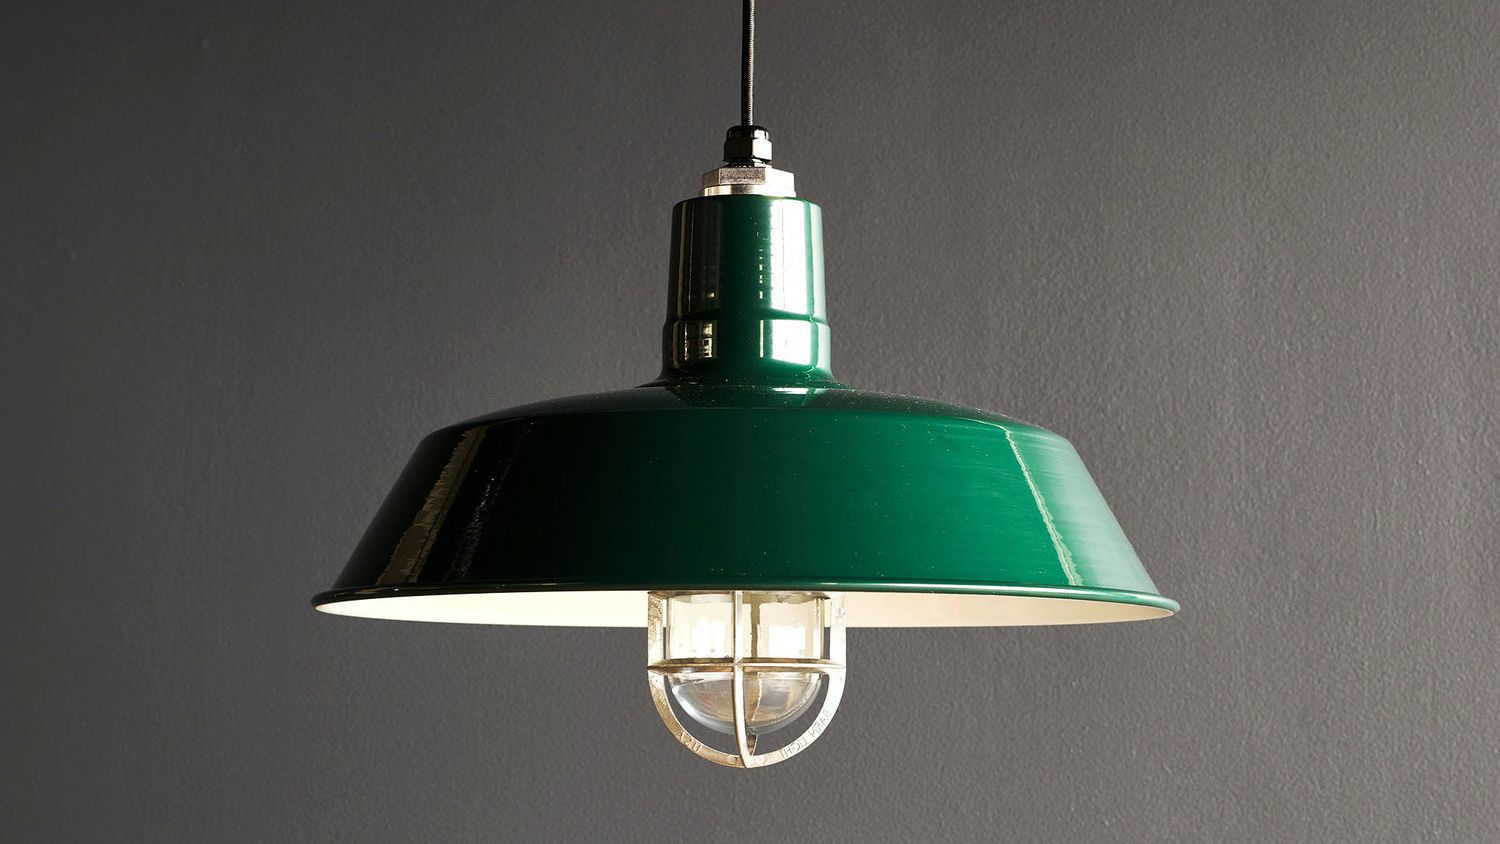 Leiters 3 Light Lantern Geometric Pendants Inside Most Up To Date Fall 2019 Sales Are Here! Get This Deal On Turgeon 3 Light (View 17 of 25)